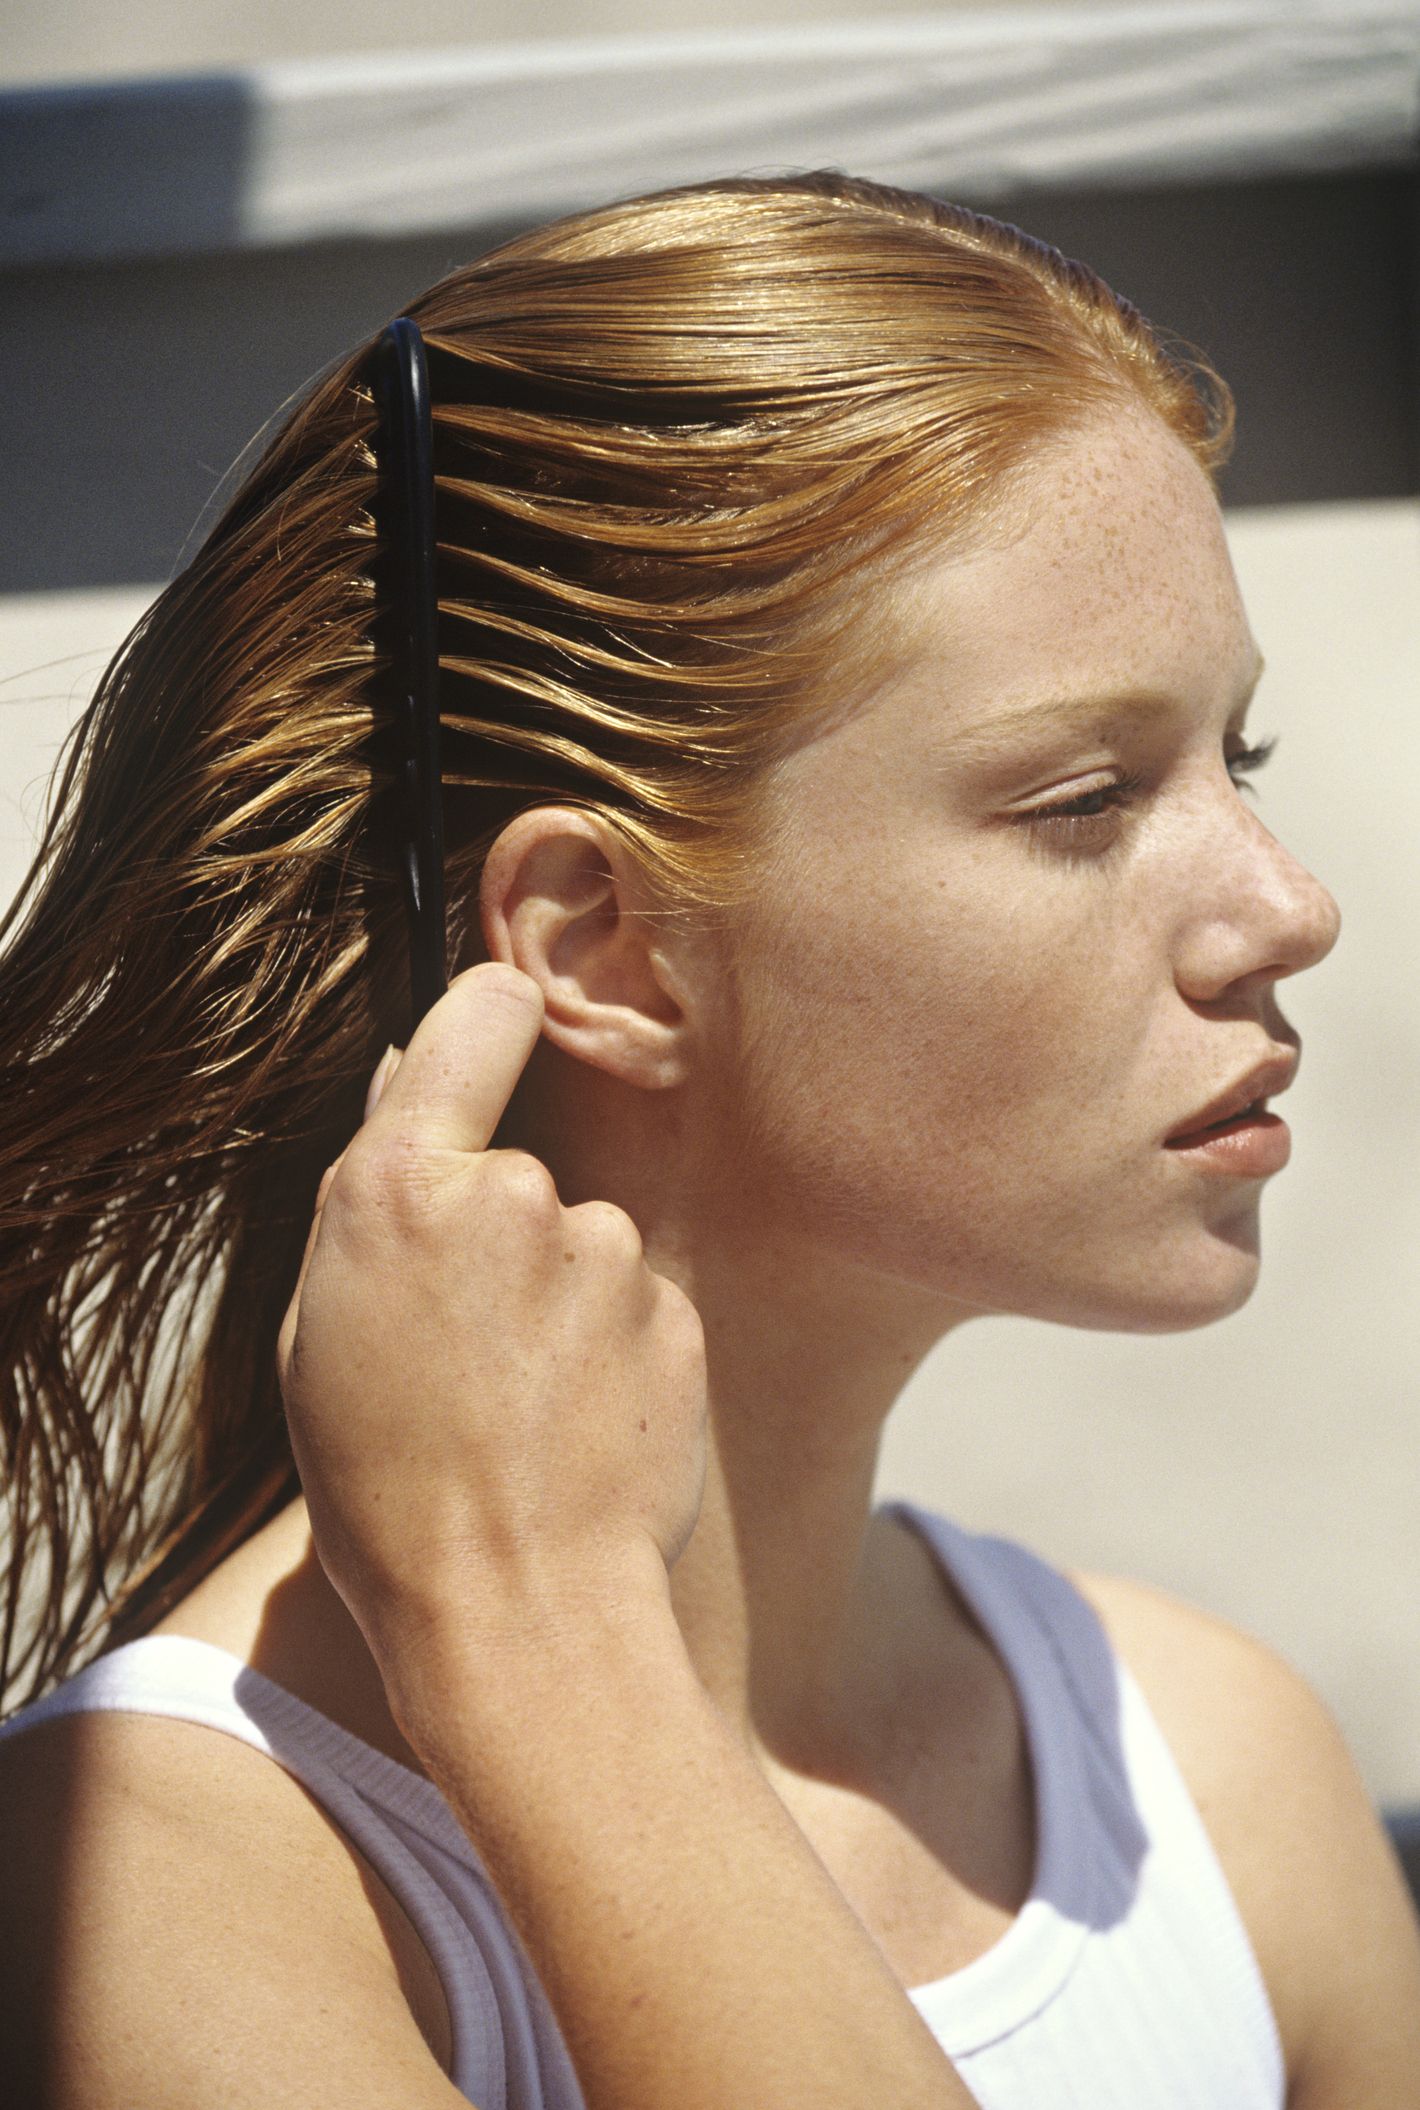 young woman combing her hair, outdoors